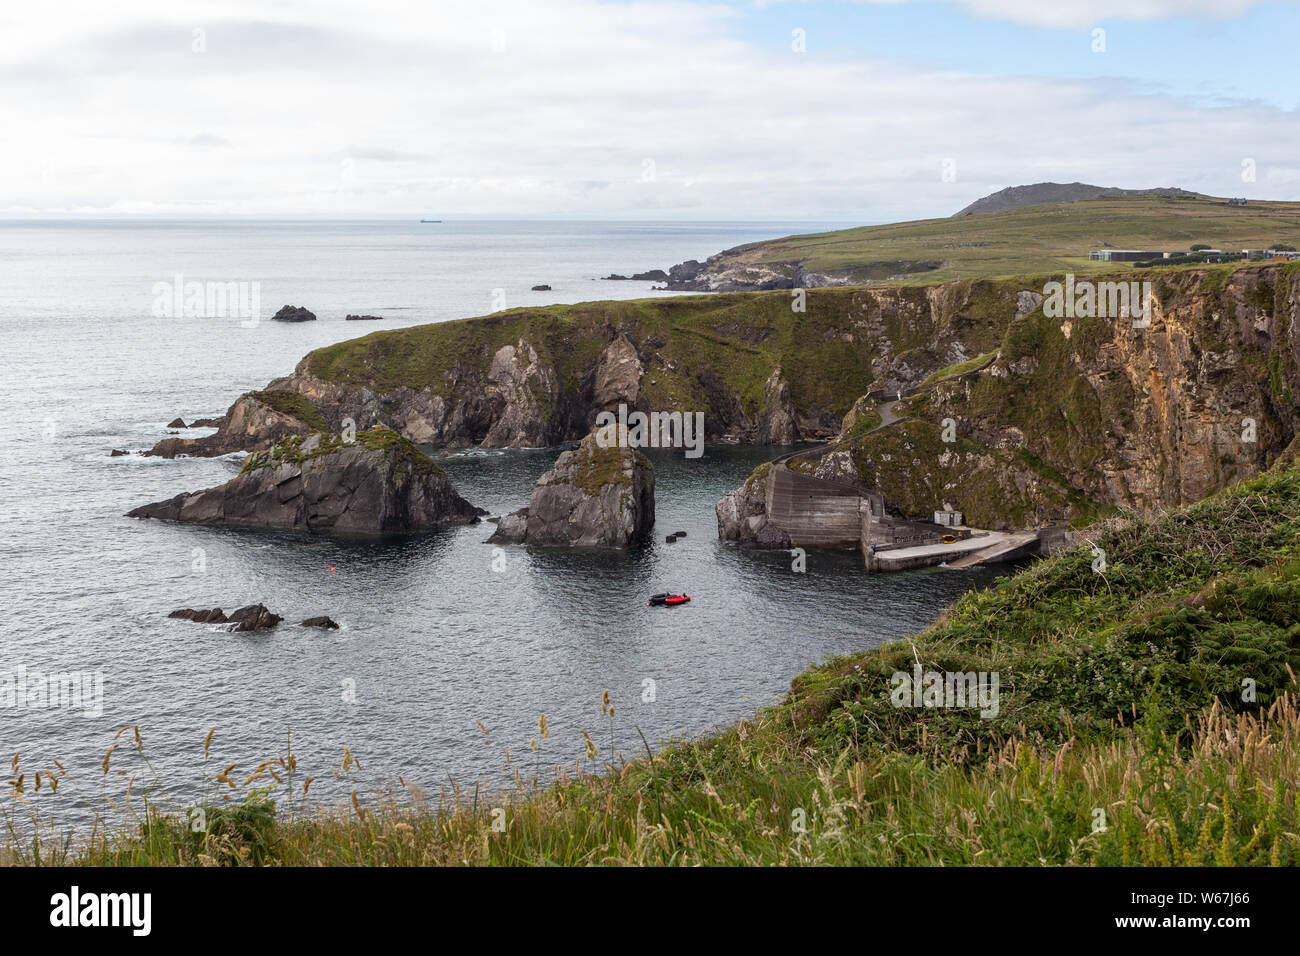 Dunquin Pier on the Dingle Peninsula, County Kerry, Ireland - Departure point for The Blasket Islands Stock Photo